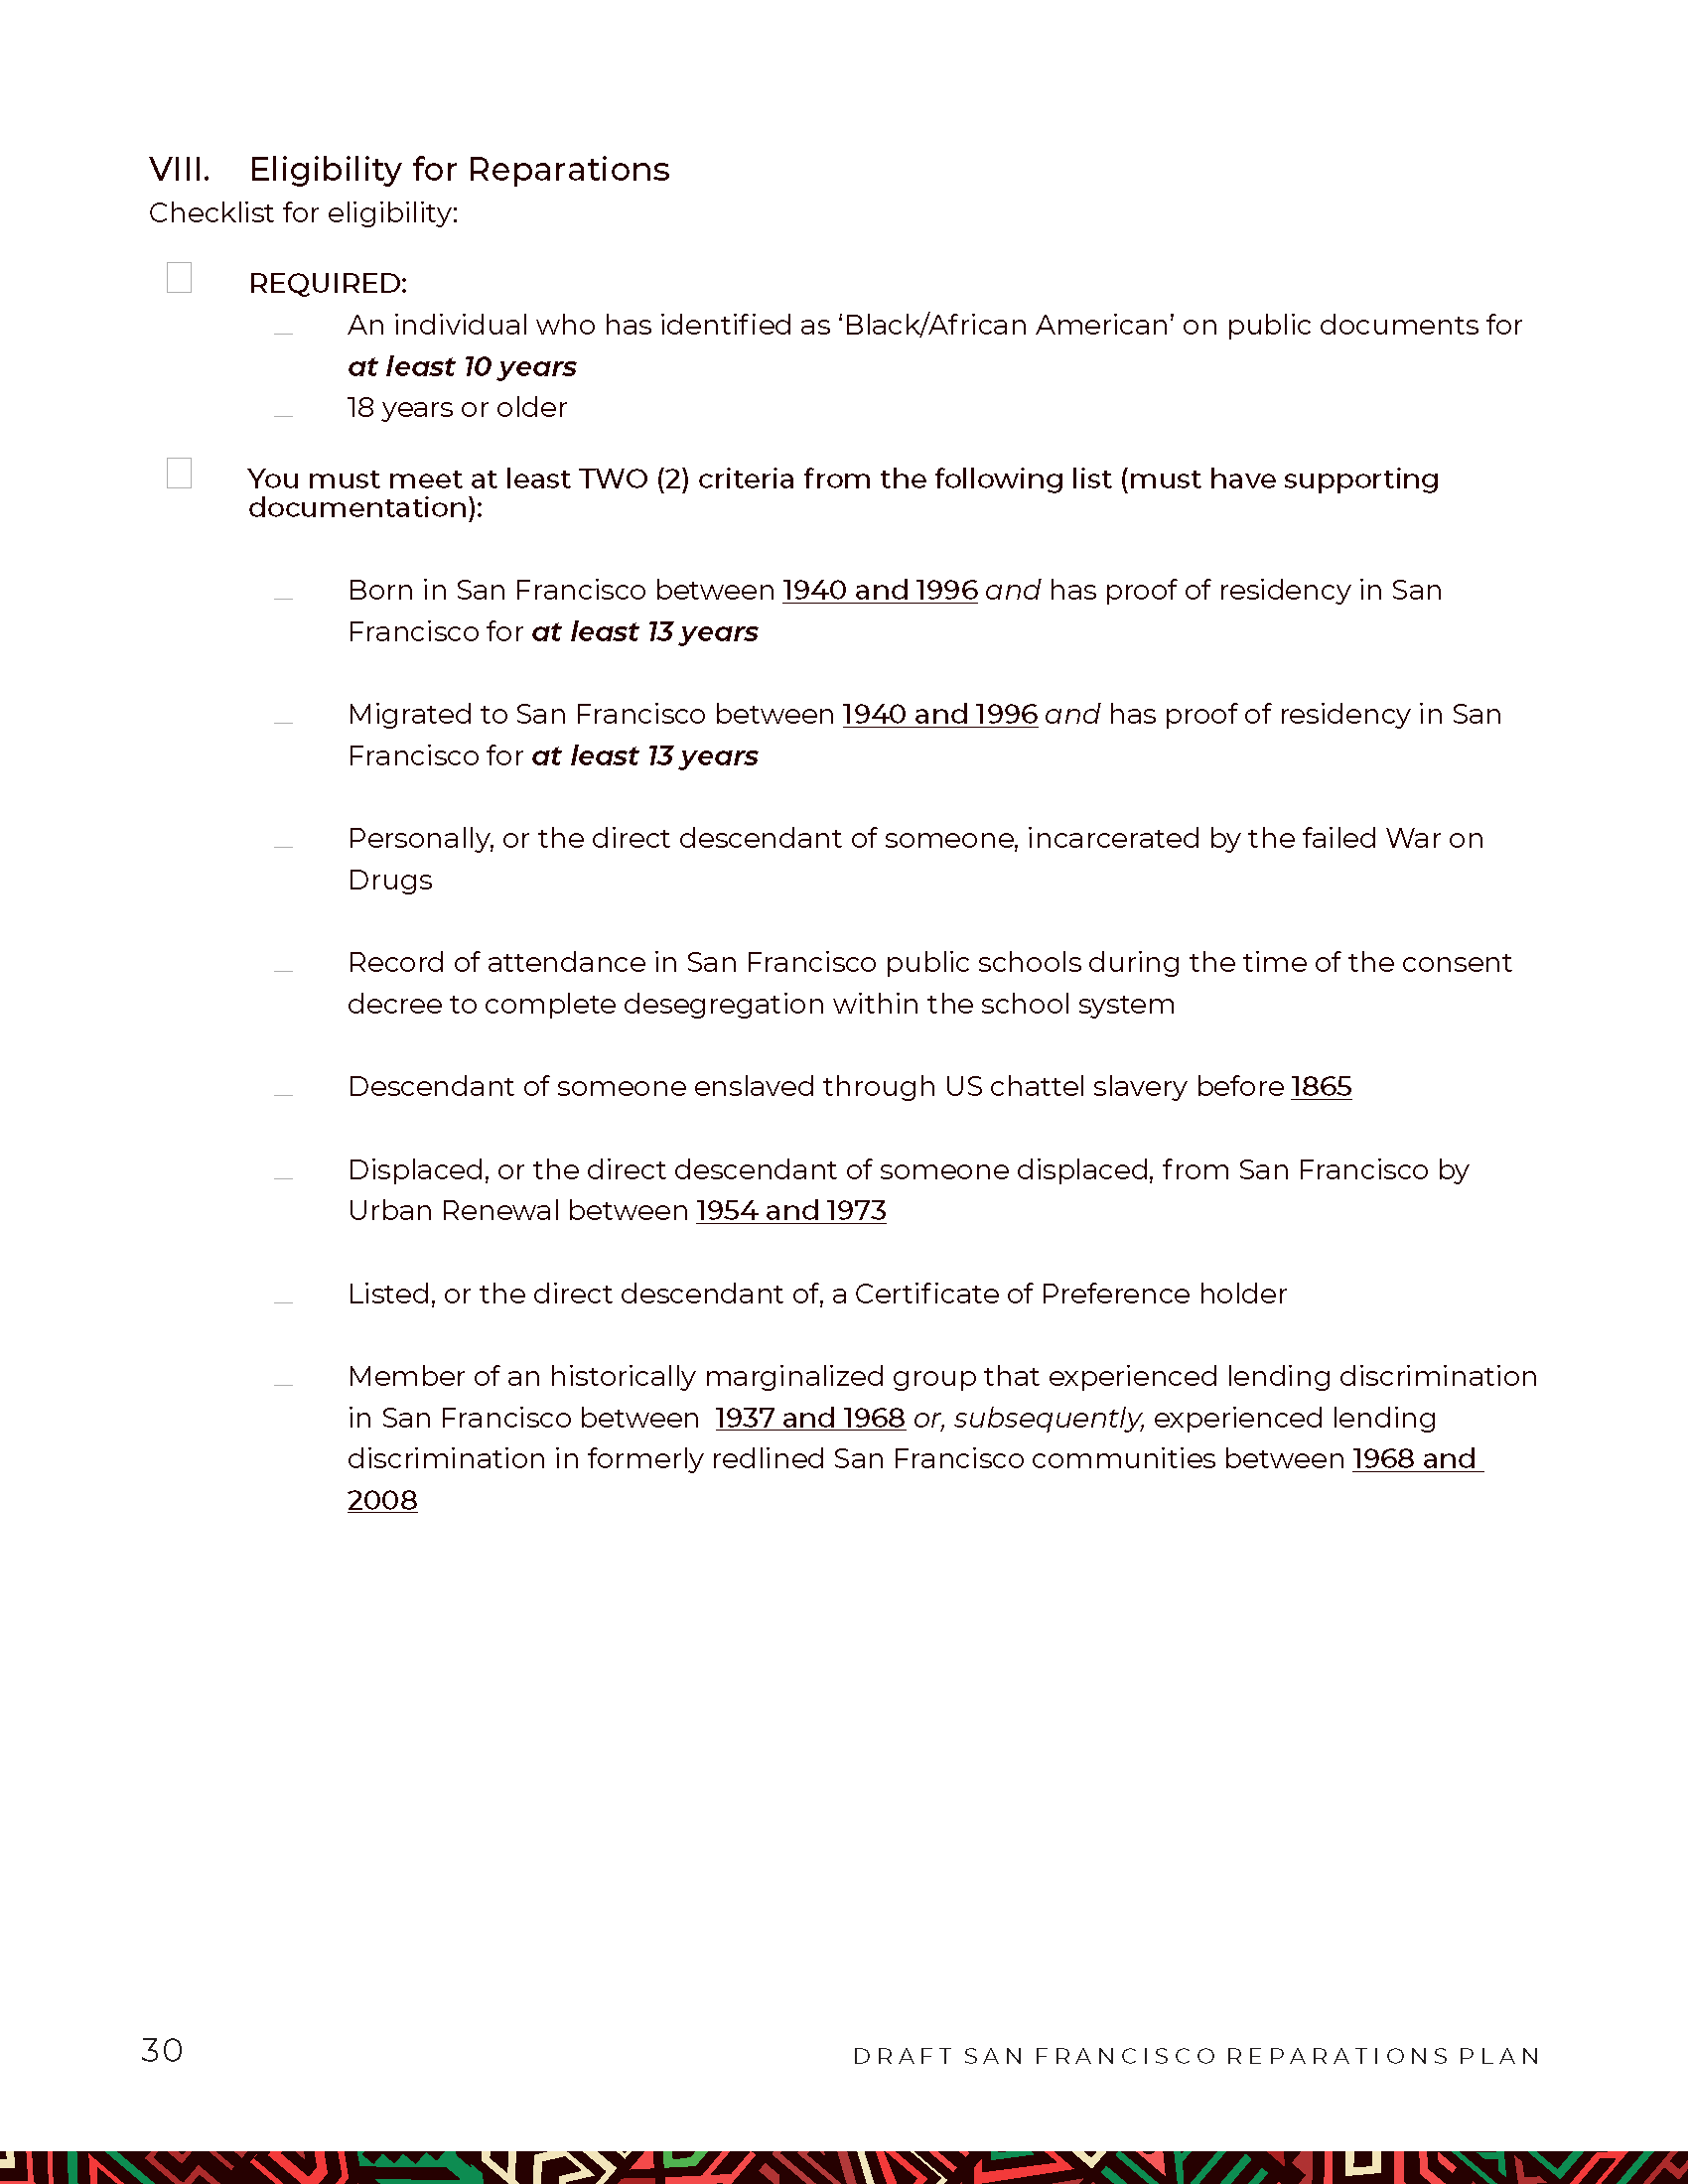 HRC Reparations 2022 Report Final_0_Page_30.png